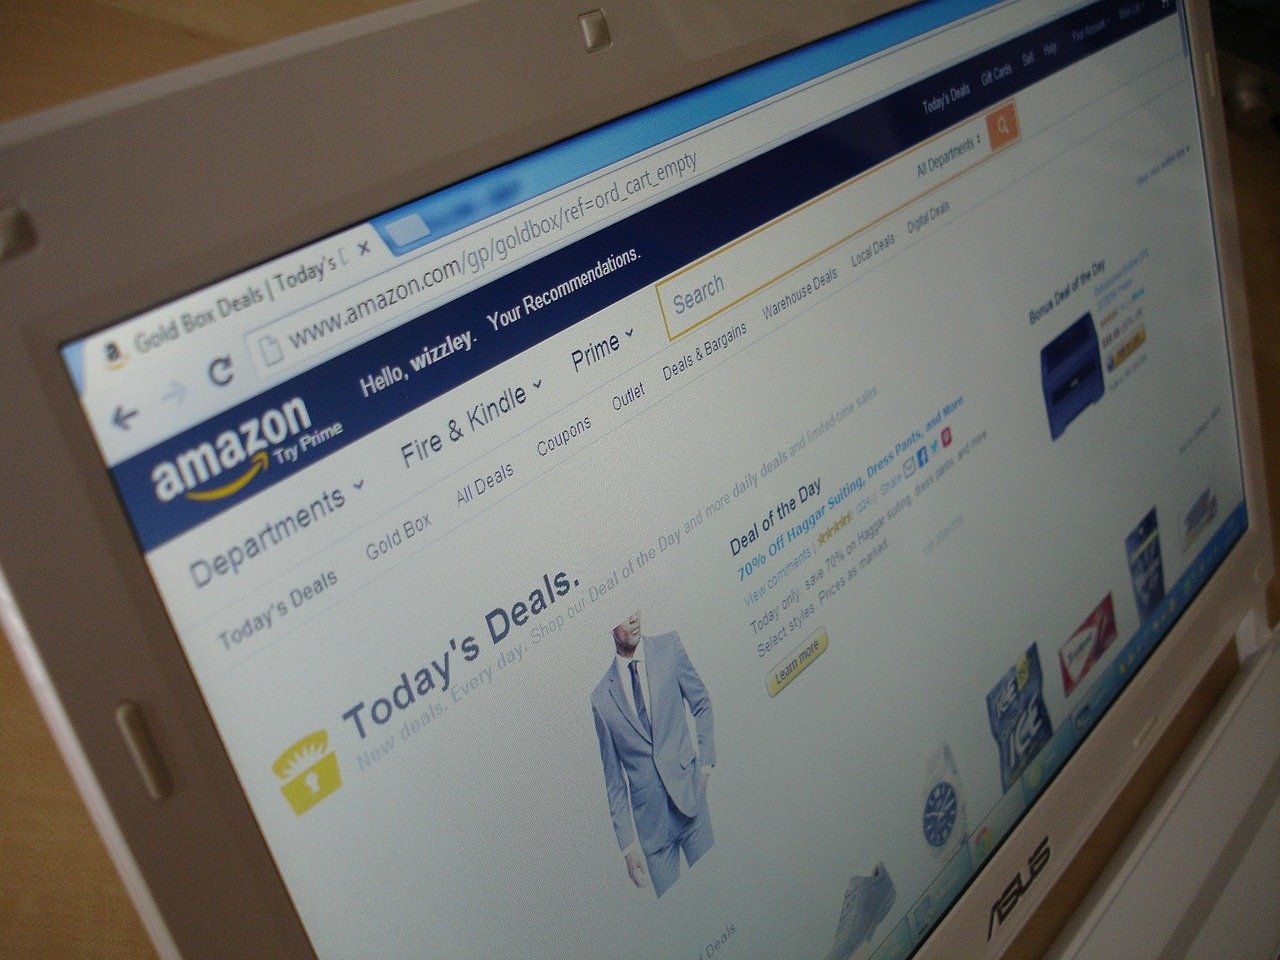 Amazon wins court battle against European Commission order to pay $300M to Luxembourg